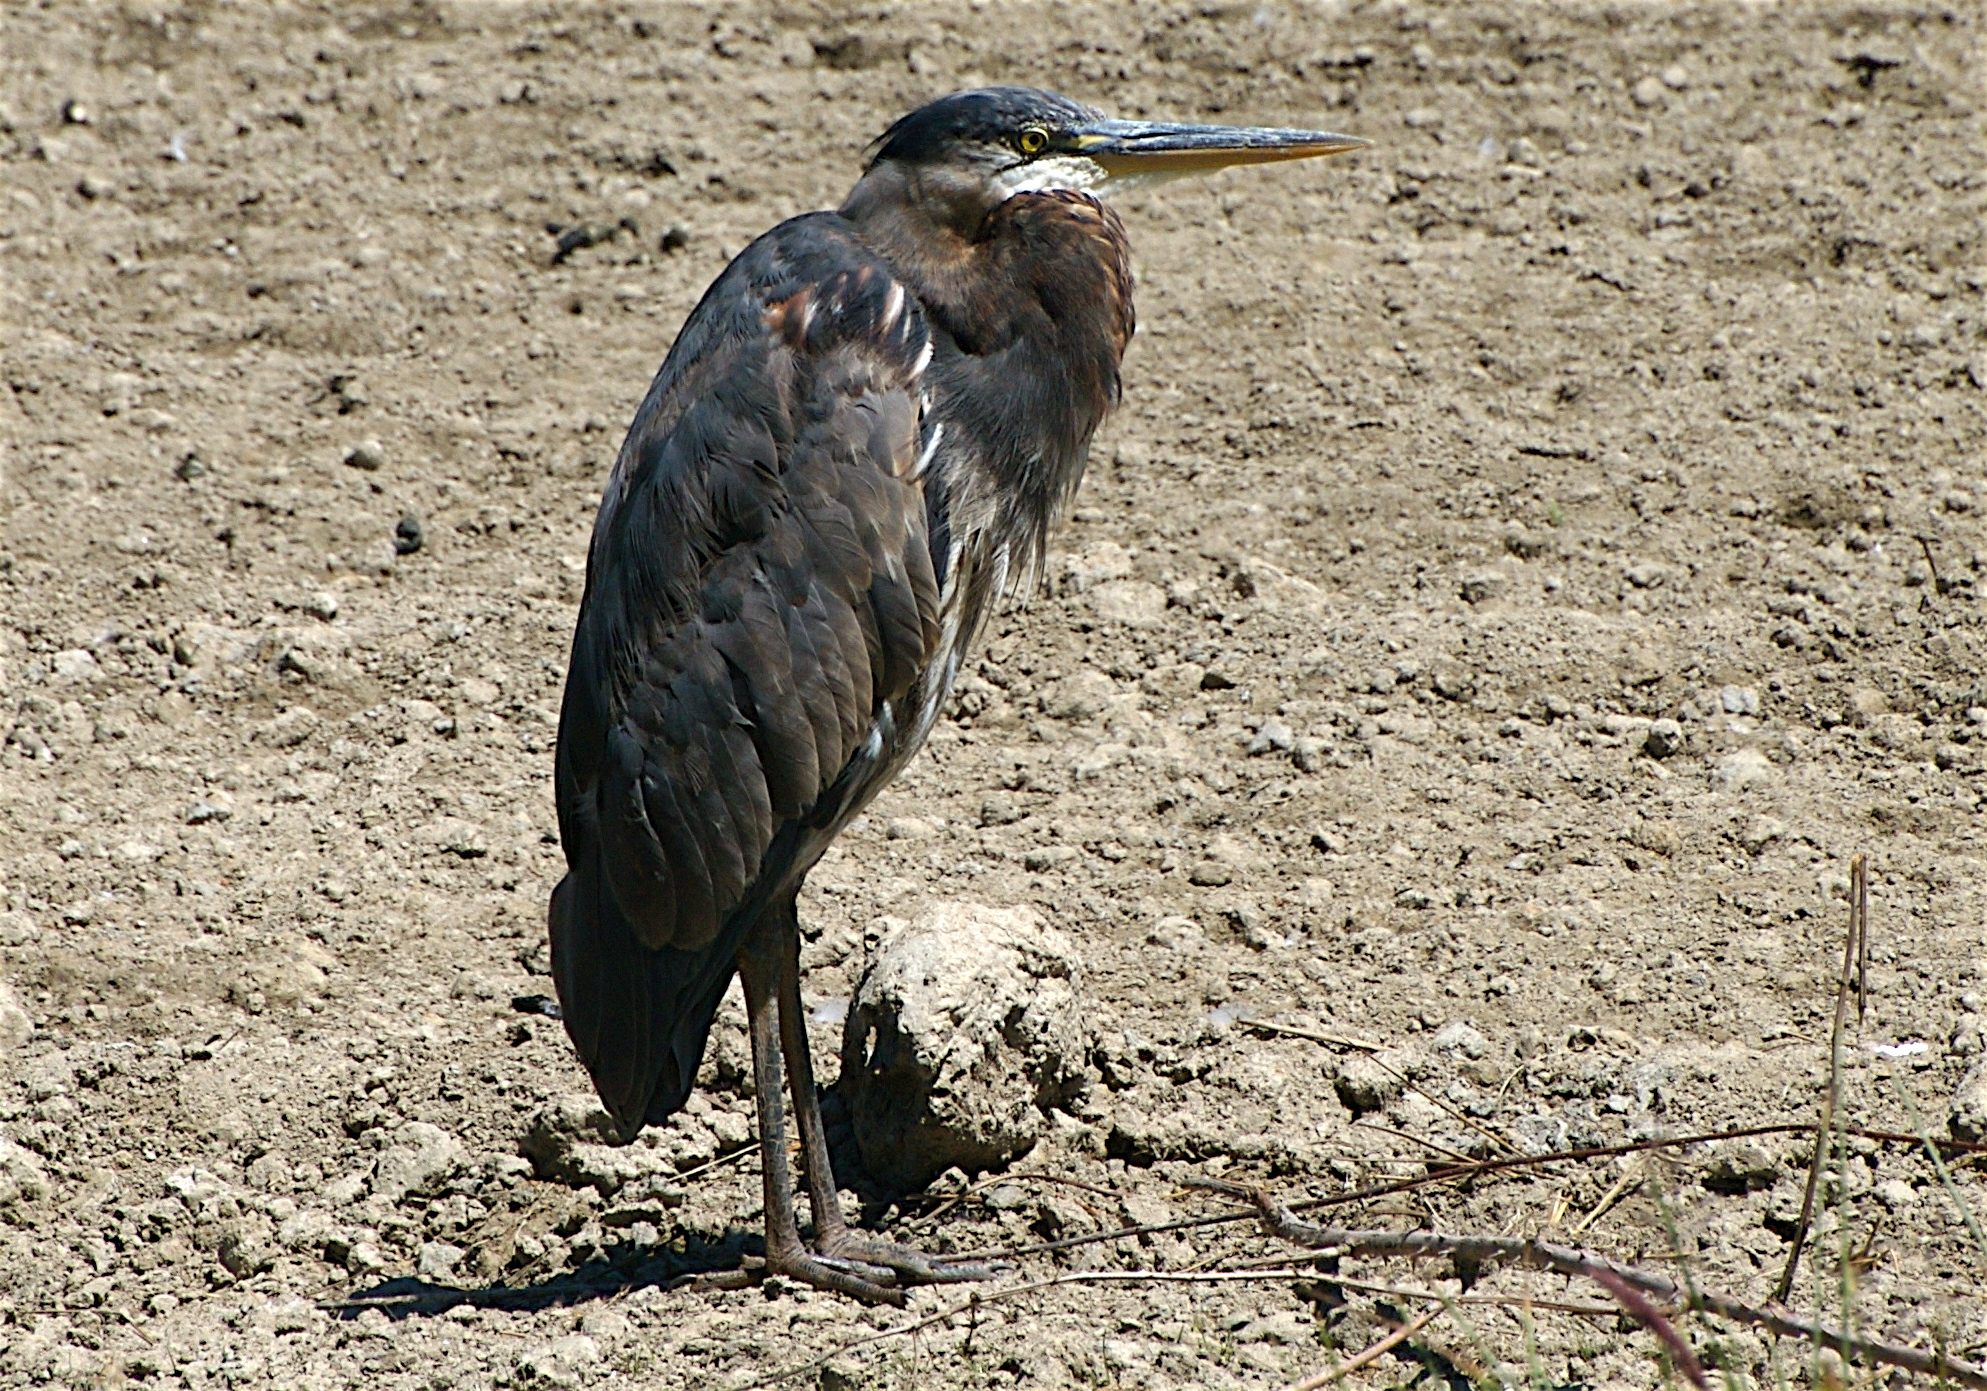 the large bird is standing in the muddy field